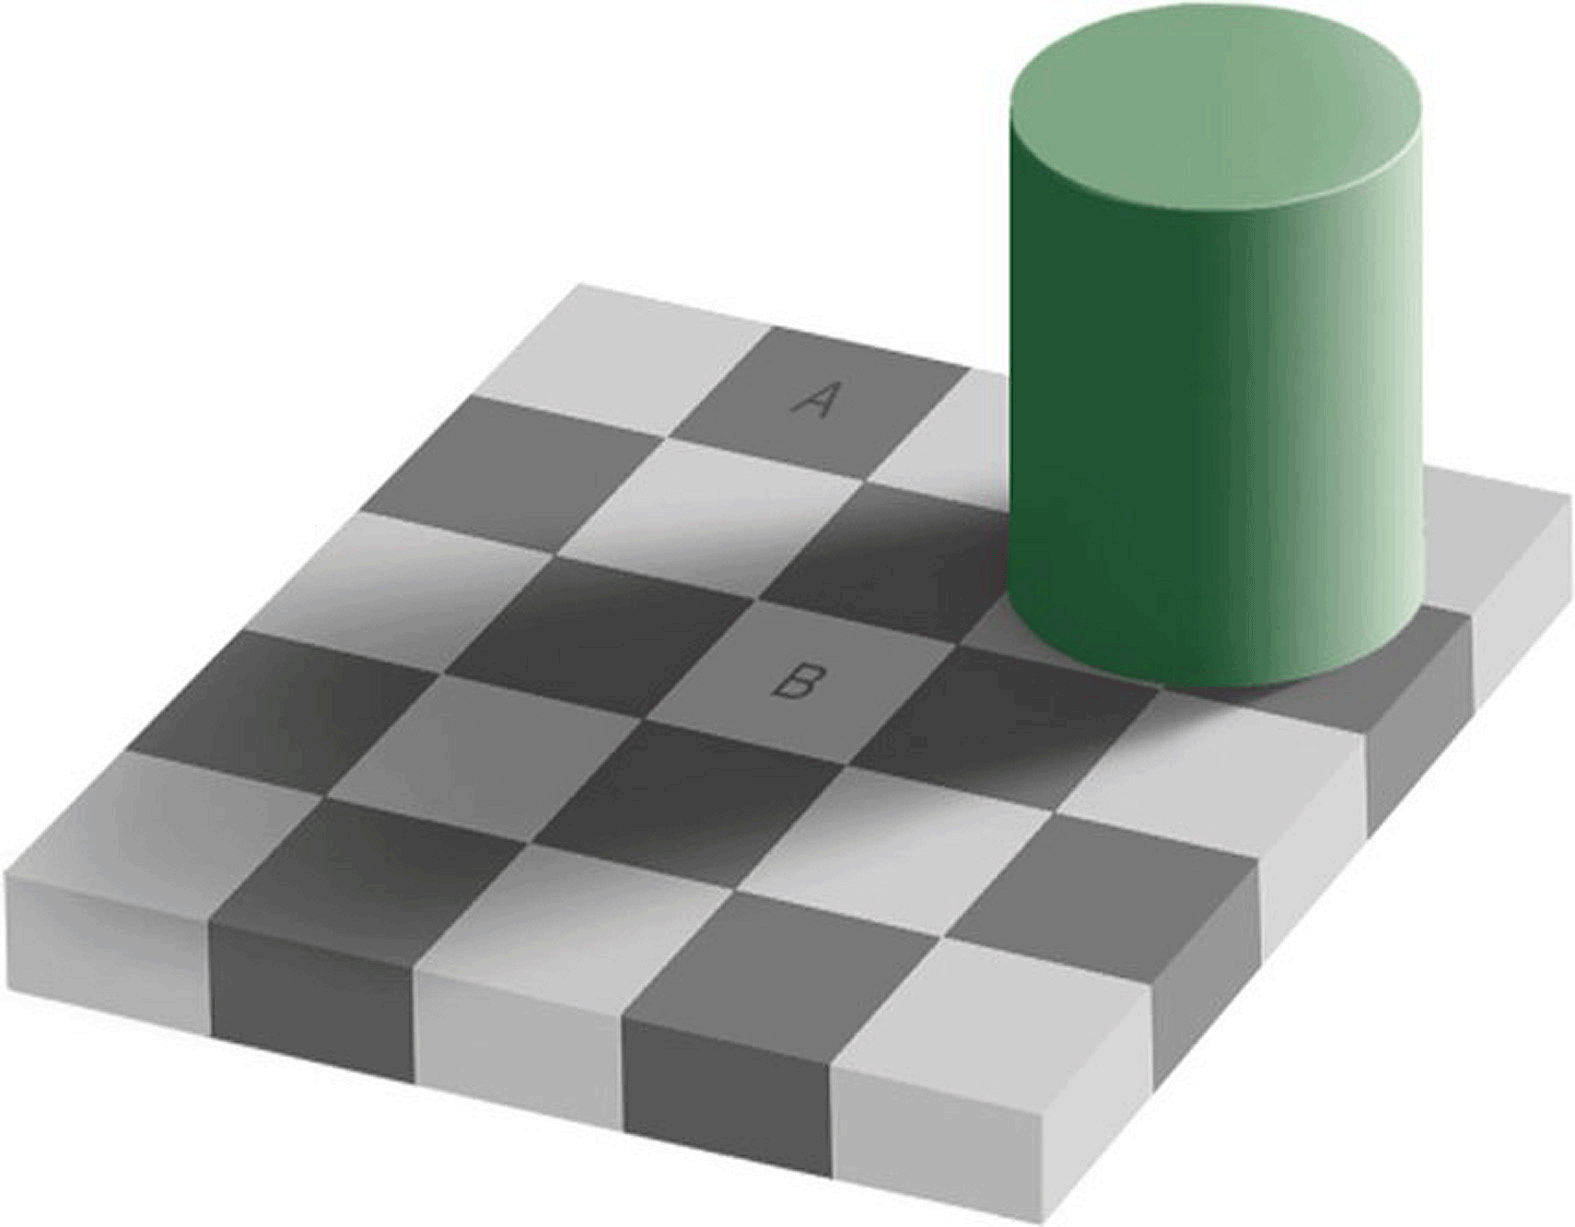 This Optical Illusions Test Will Literally Melt Your Brain